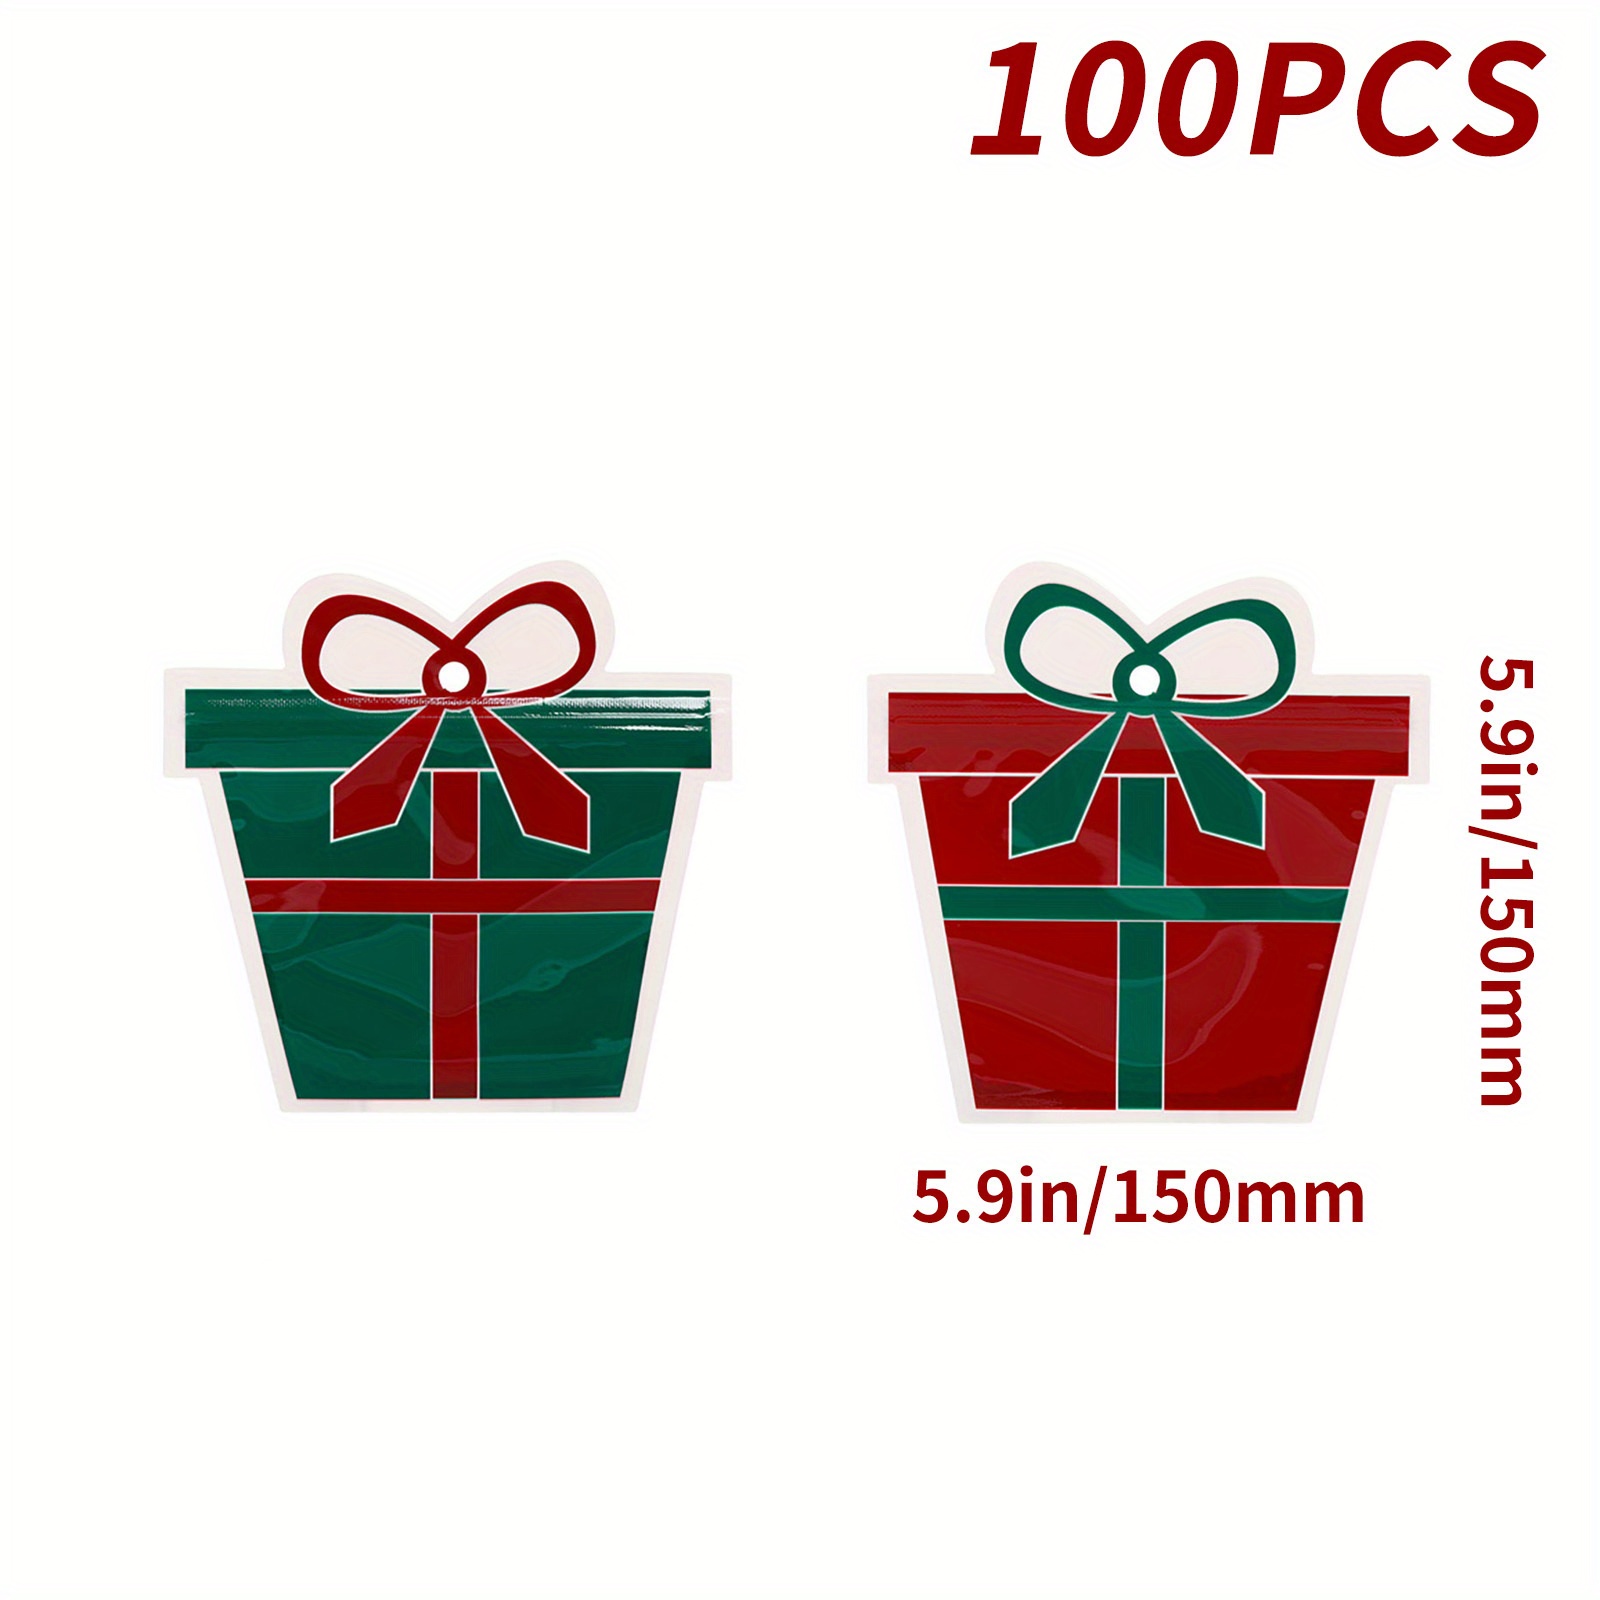 Find More Gift Bags & Wrapping Supplies Information about 1000pcs